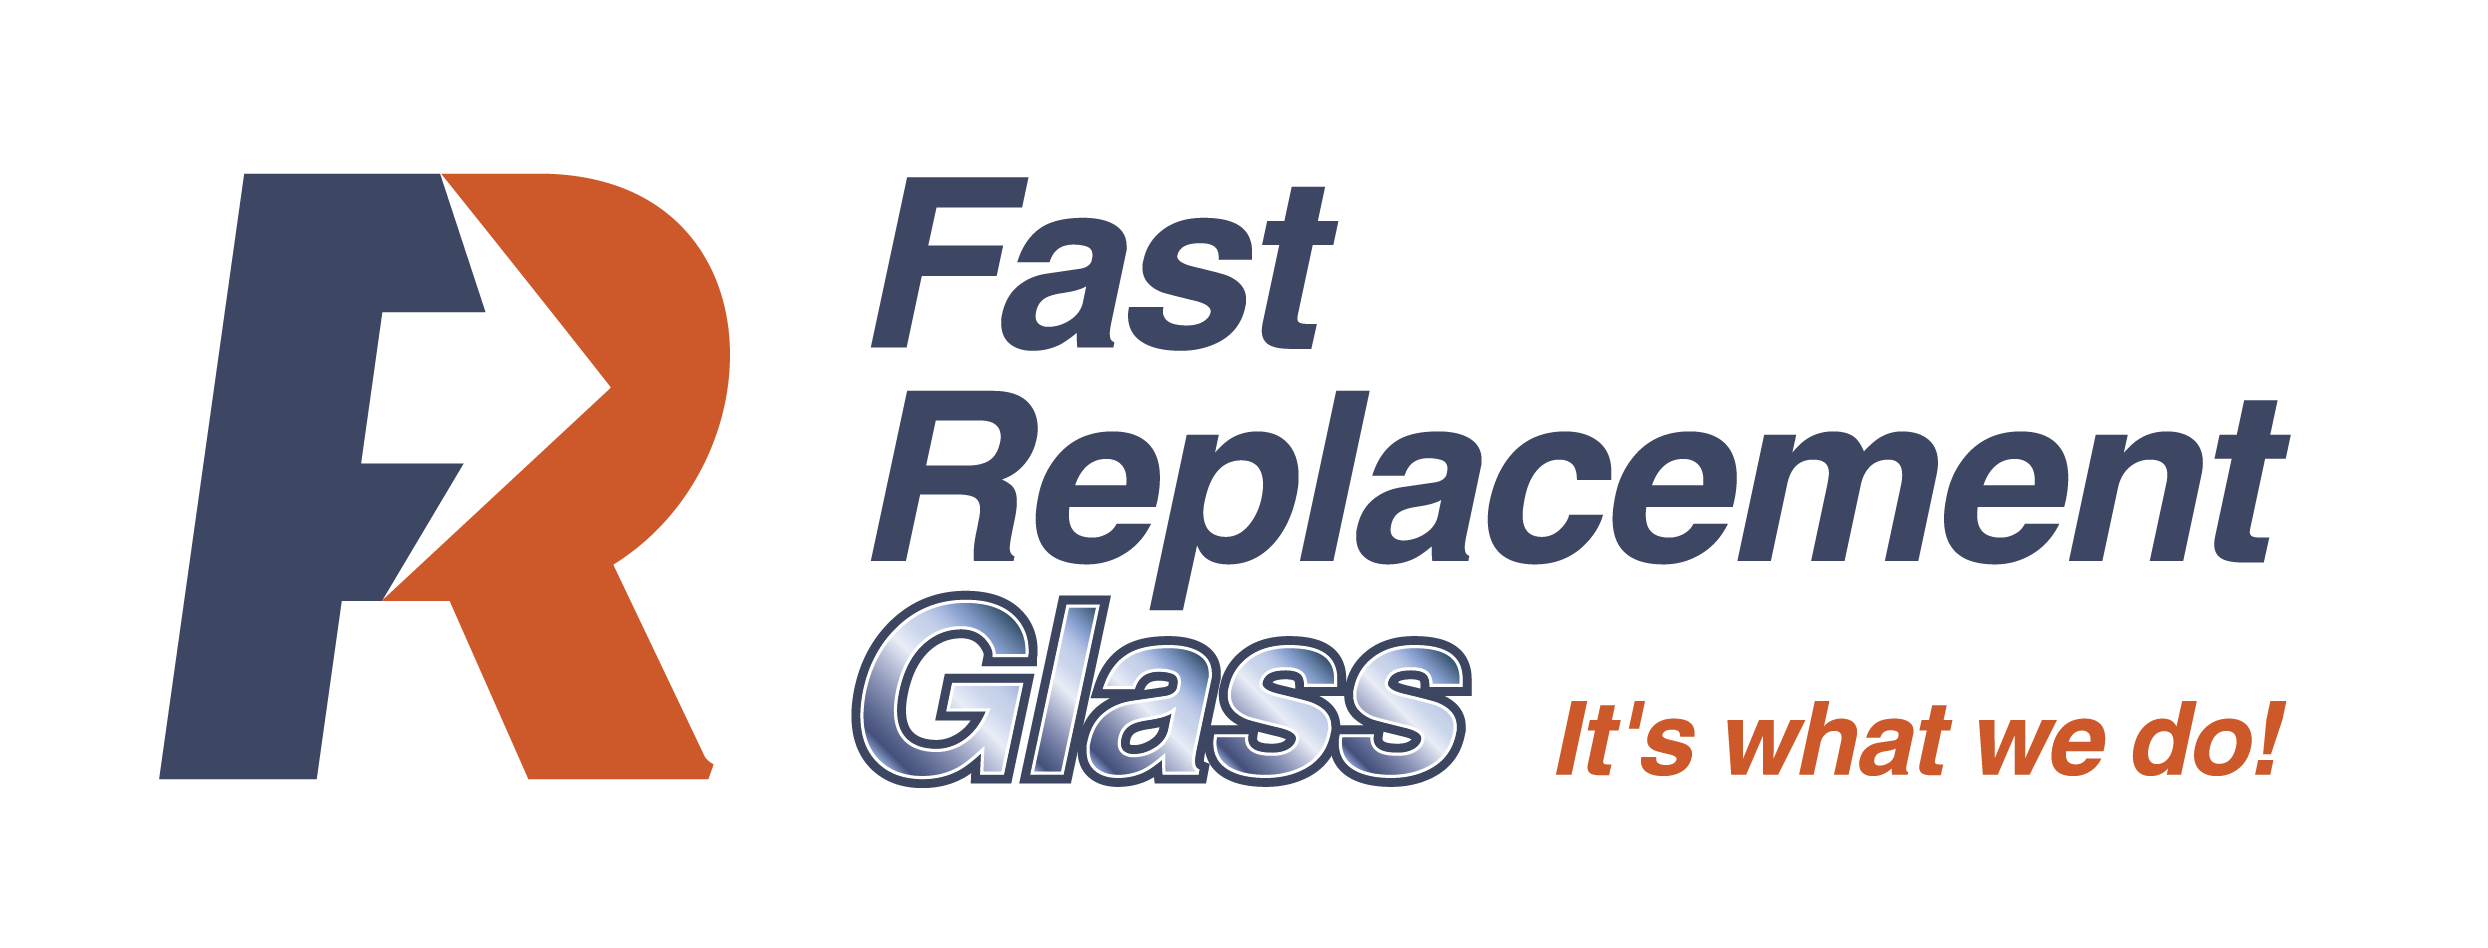 Fast Replacement Glass - Ceramic and Tempered Glass for your Wood Stove and Fireplace